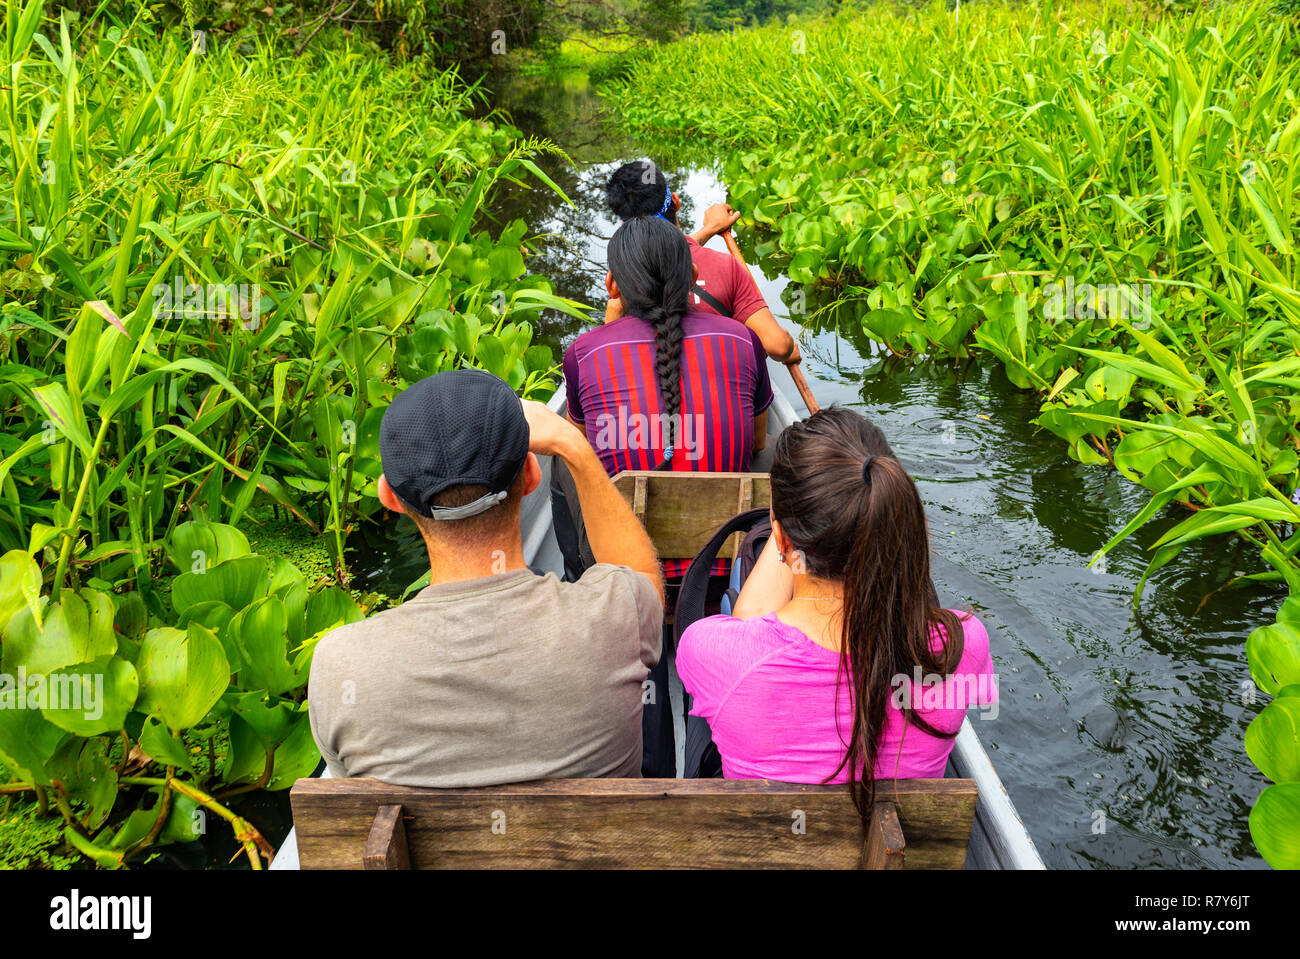 Tourists using traditional canoe transport during a bird watching tour inside the Yasuni National Park located in the Amazon River Basin, Ecuador. Stock Photo